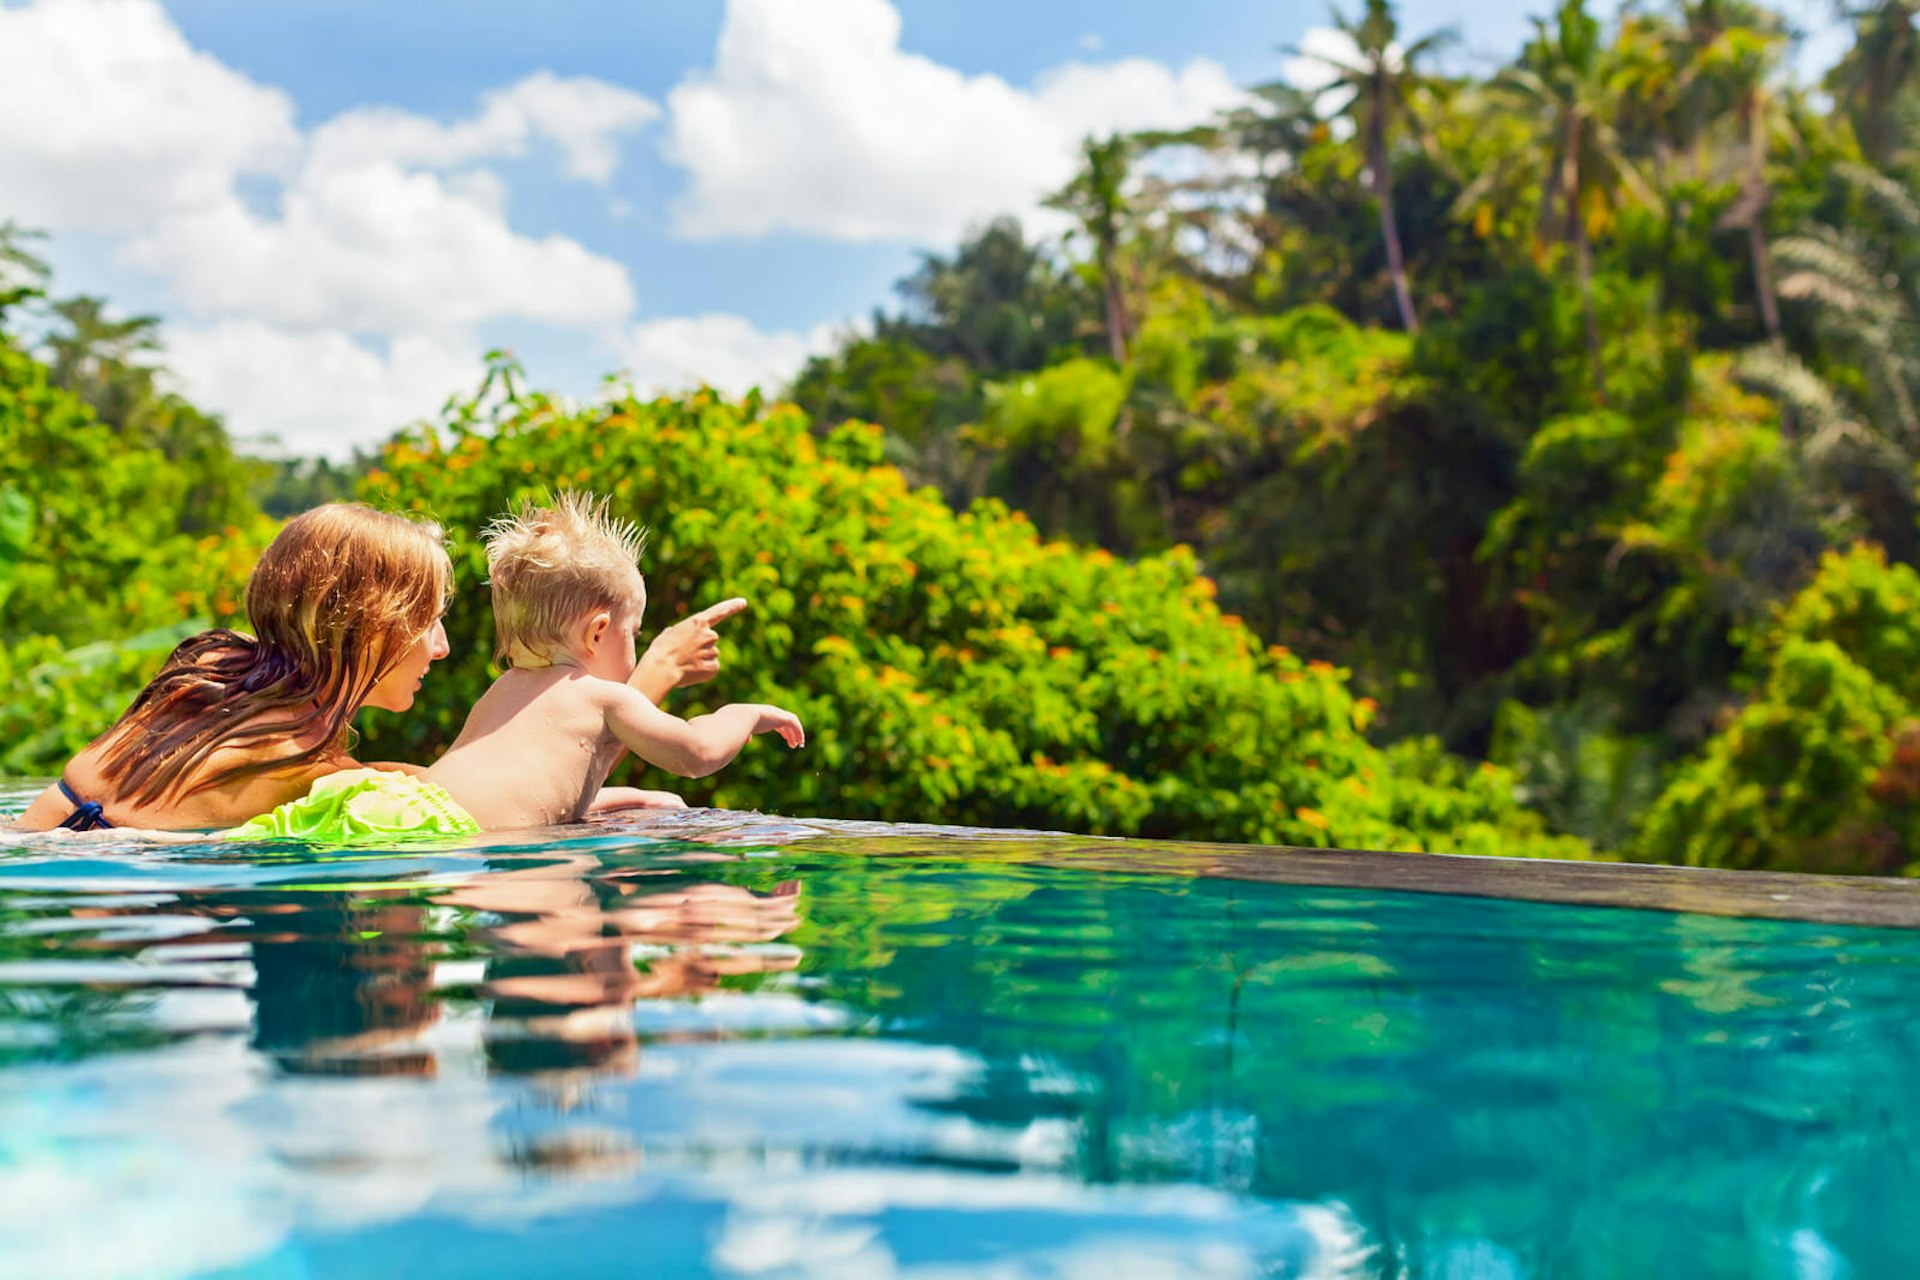 Family travel myths: ‘Whatever you do, don’t pee in the pool!’ © Tropical Studio / Shutterstock